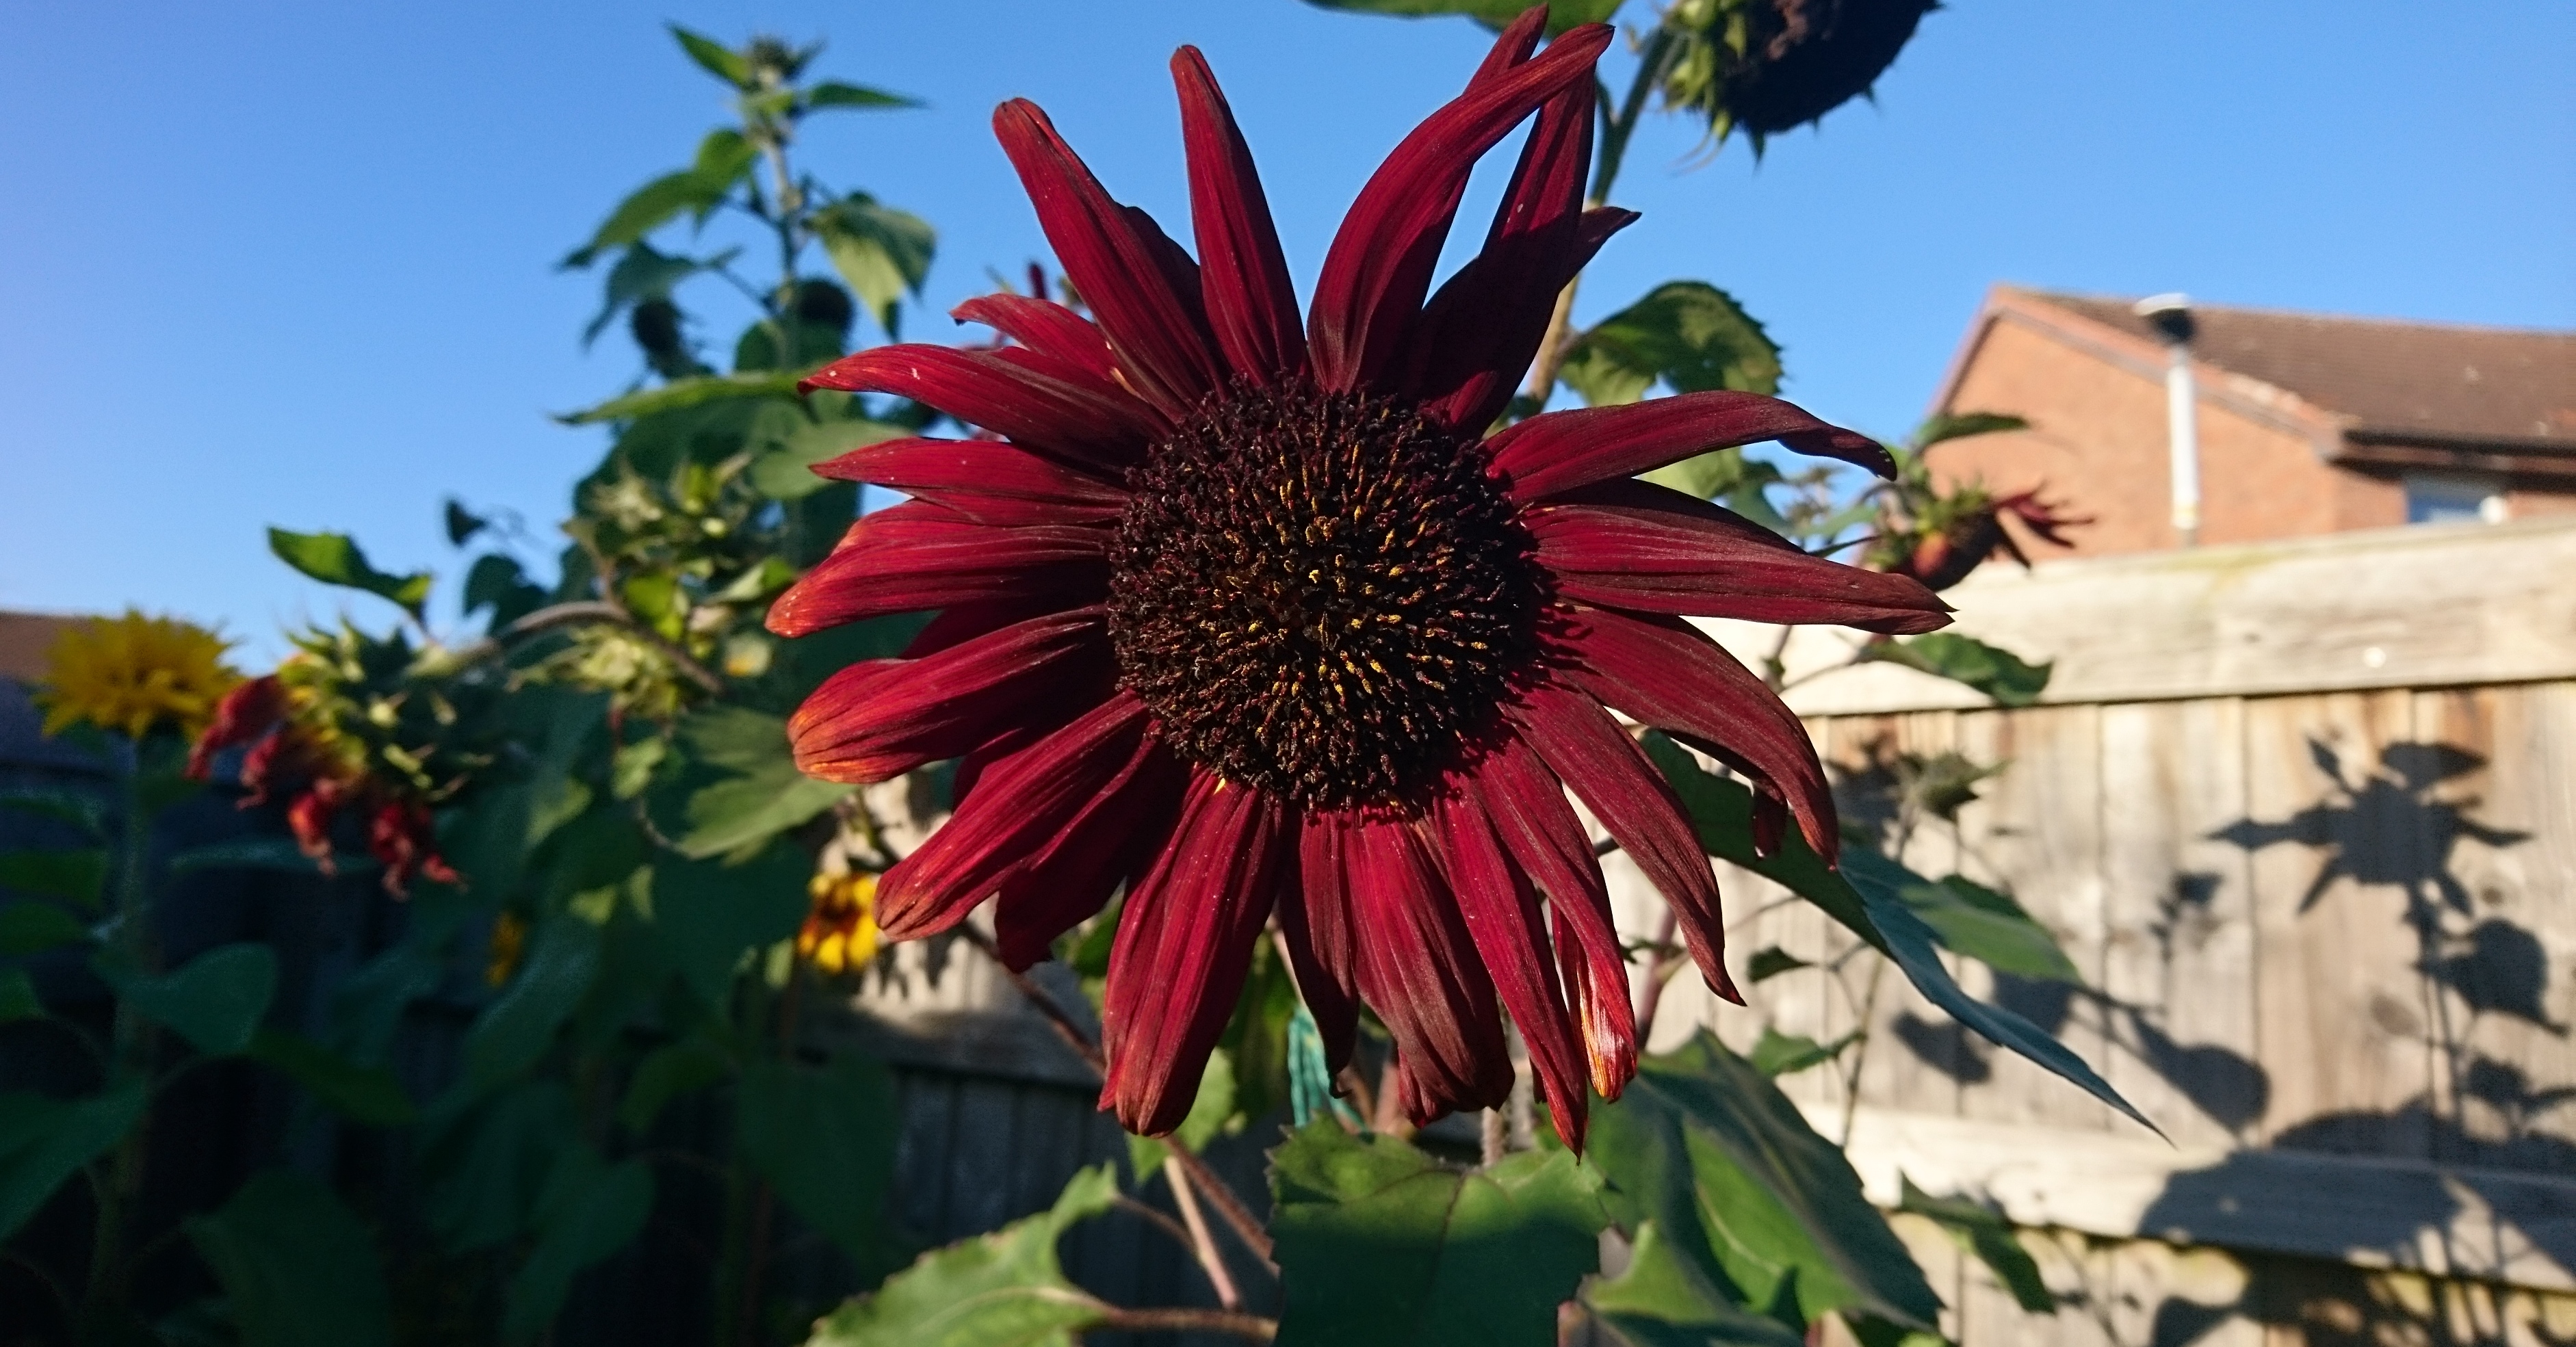 Sunflower grown in Chester during The Big Sunflower Project 2019.